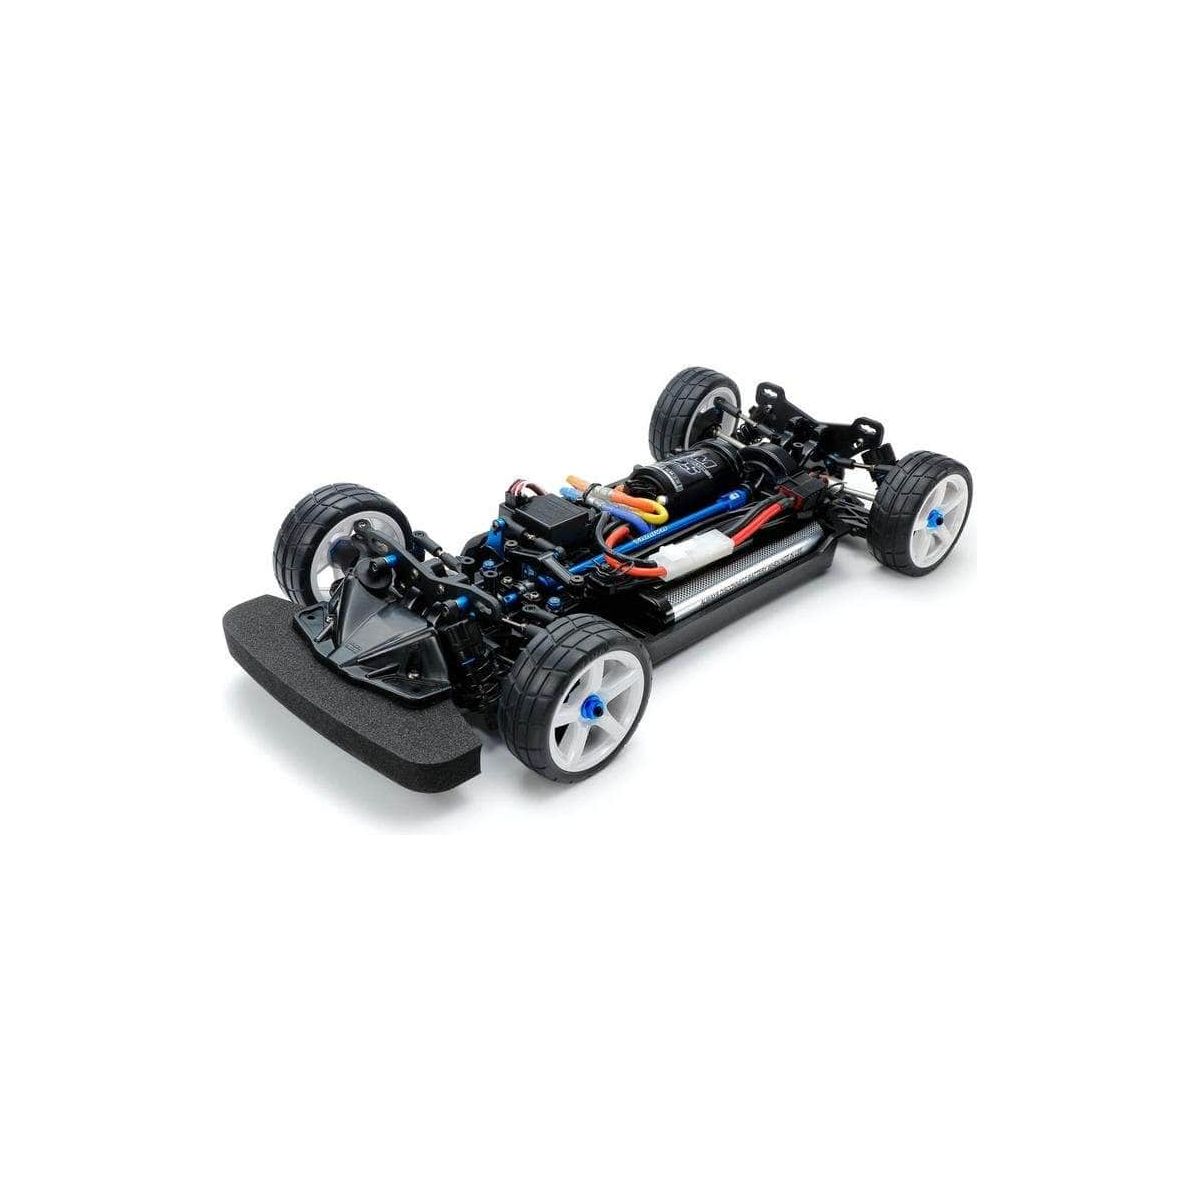 R/C Surface Kits (Buggies, Cars, Trucks, Dragsters, etc)